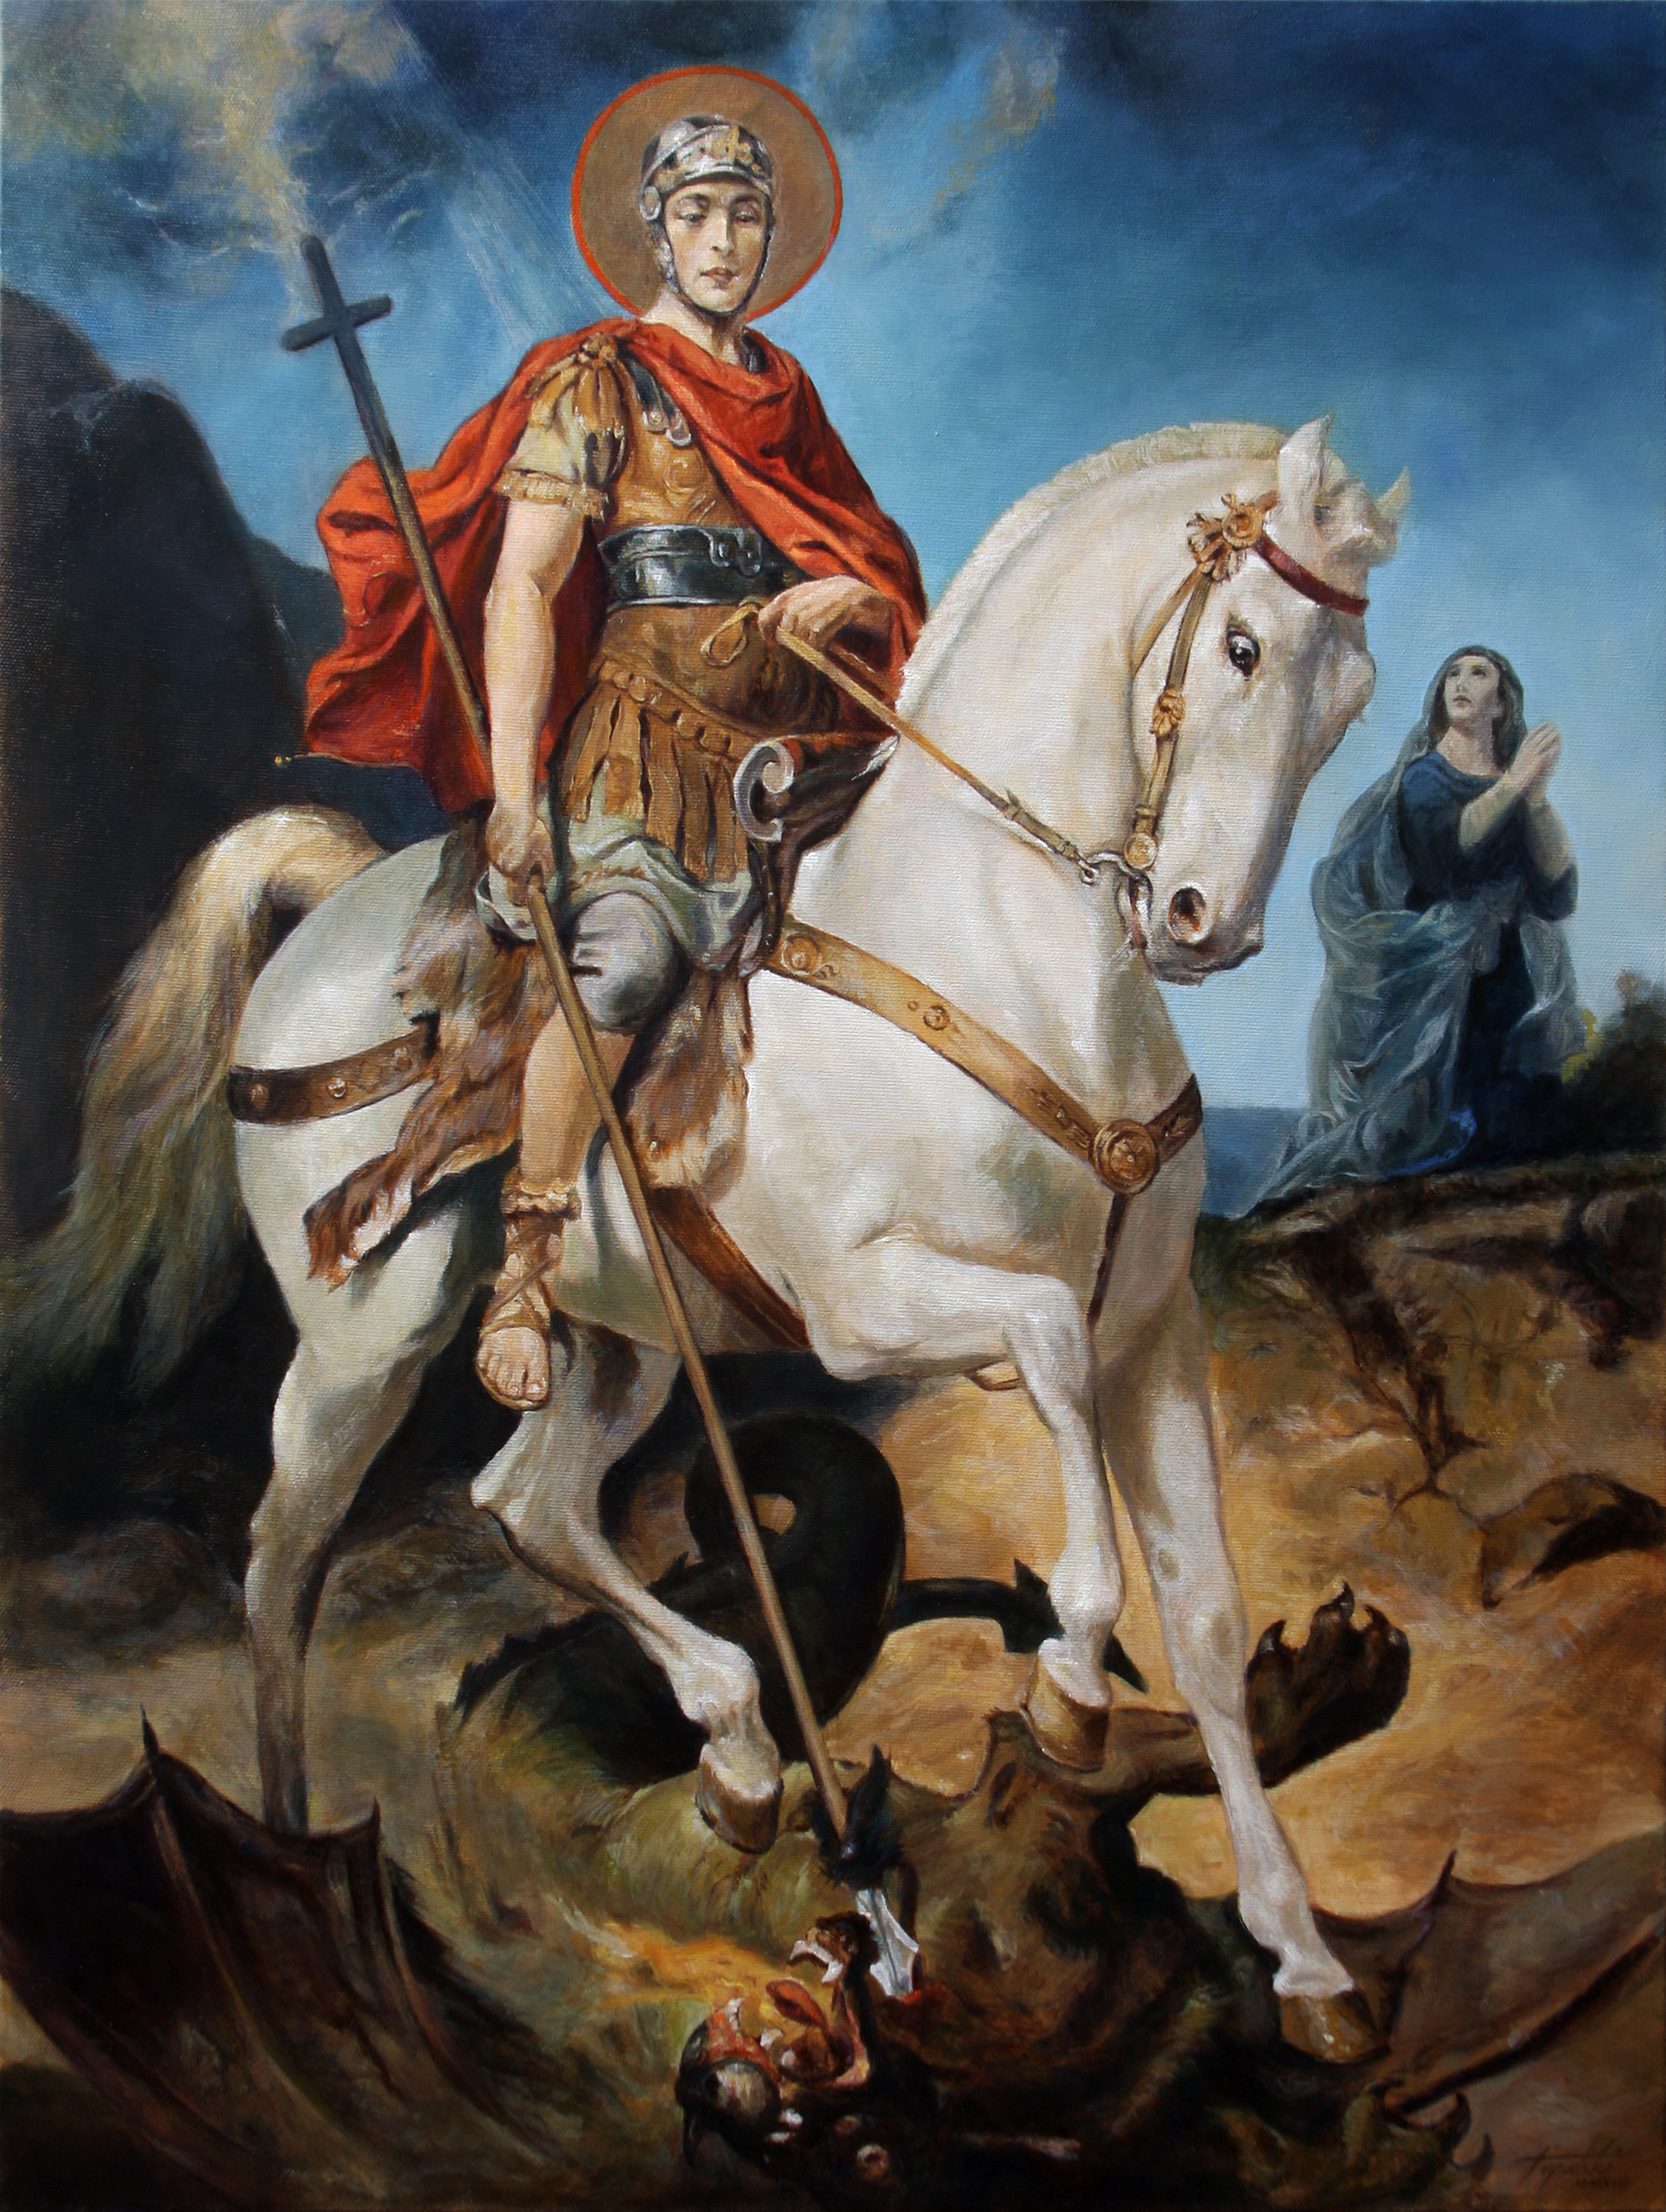 Saint George and the Dragon – Religious Oil Painting | Fine Arts ...